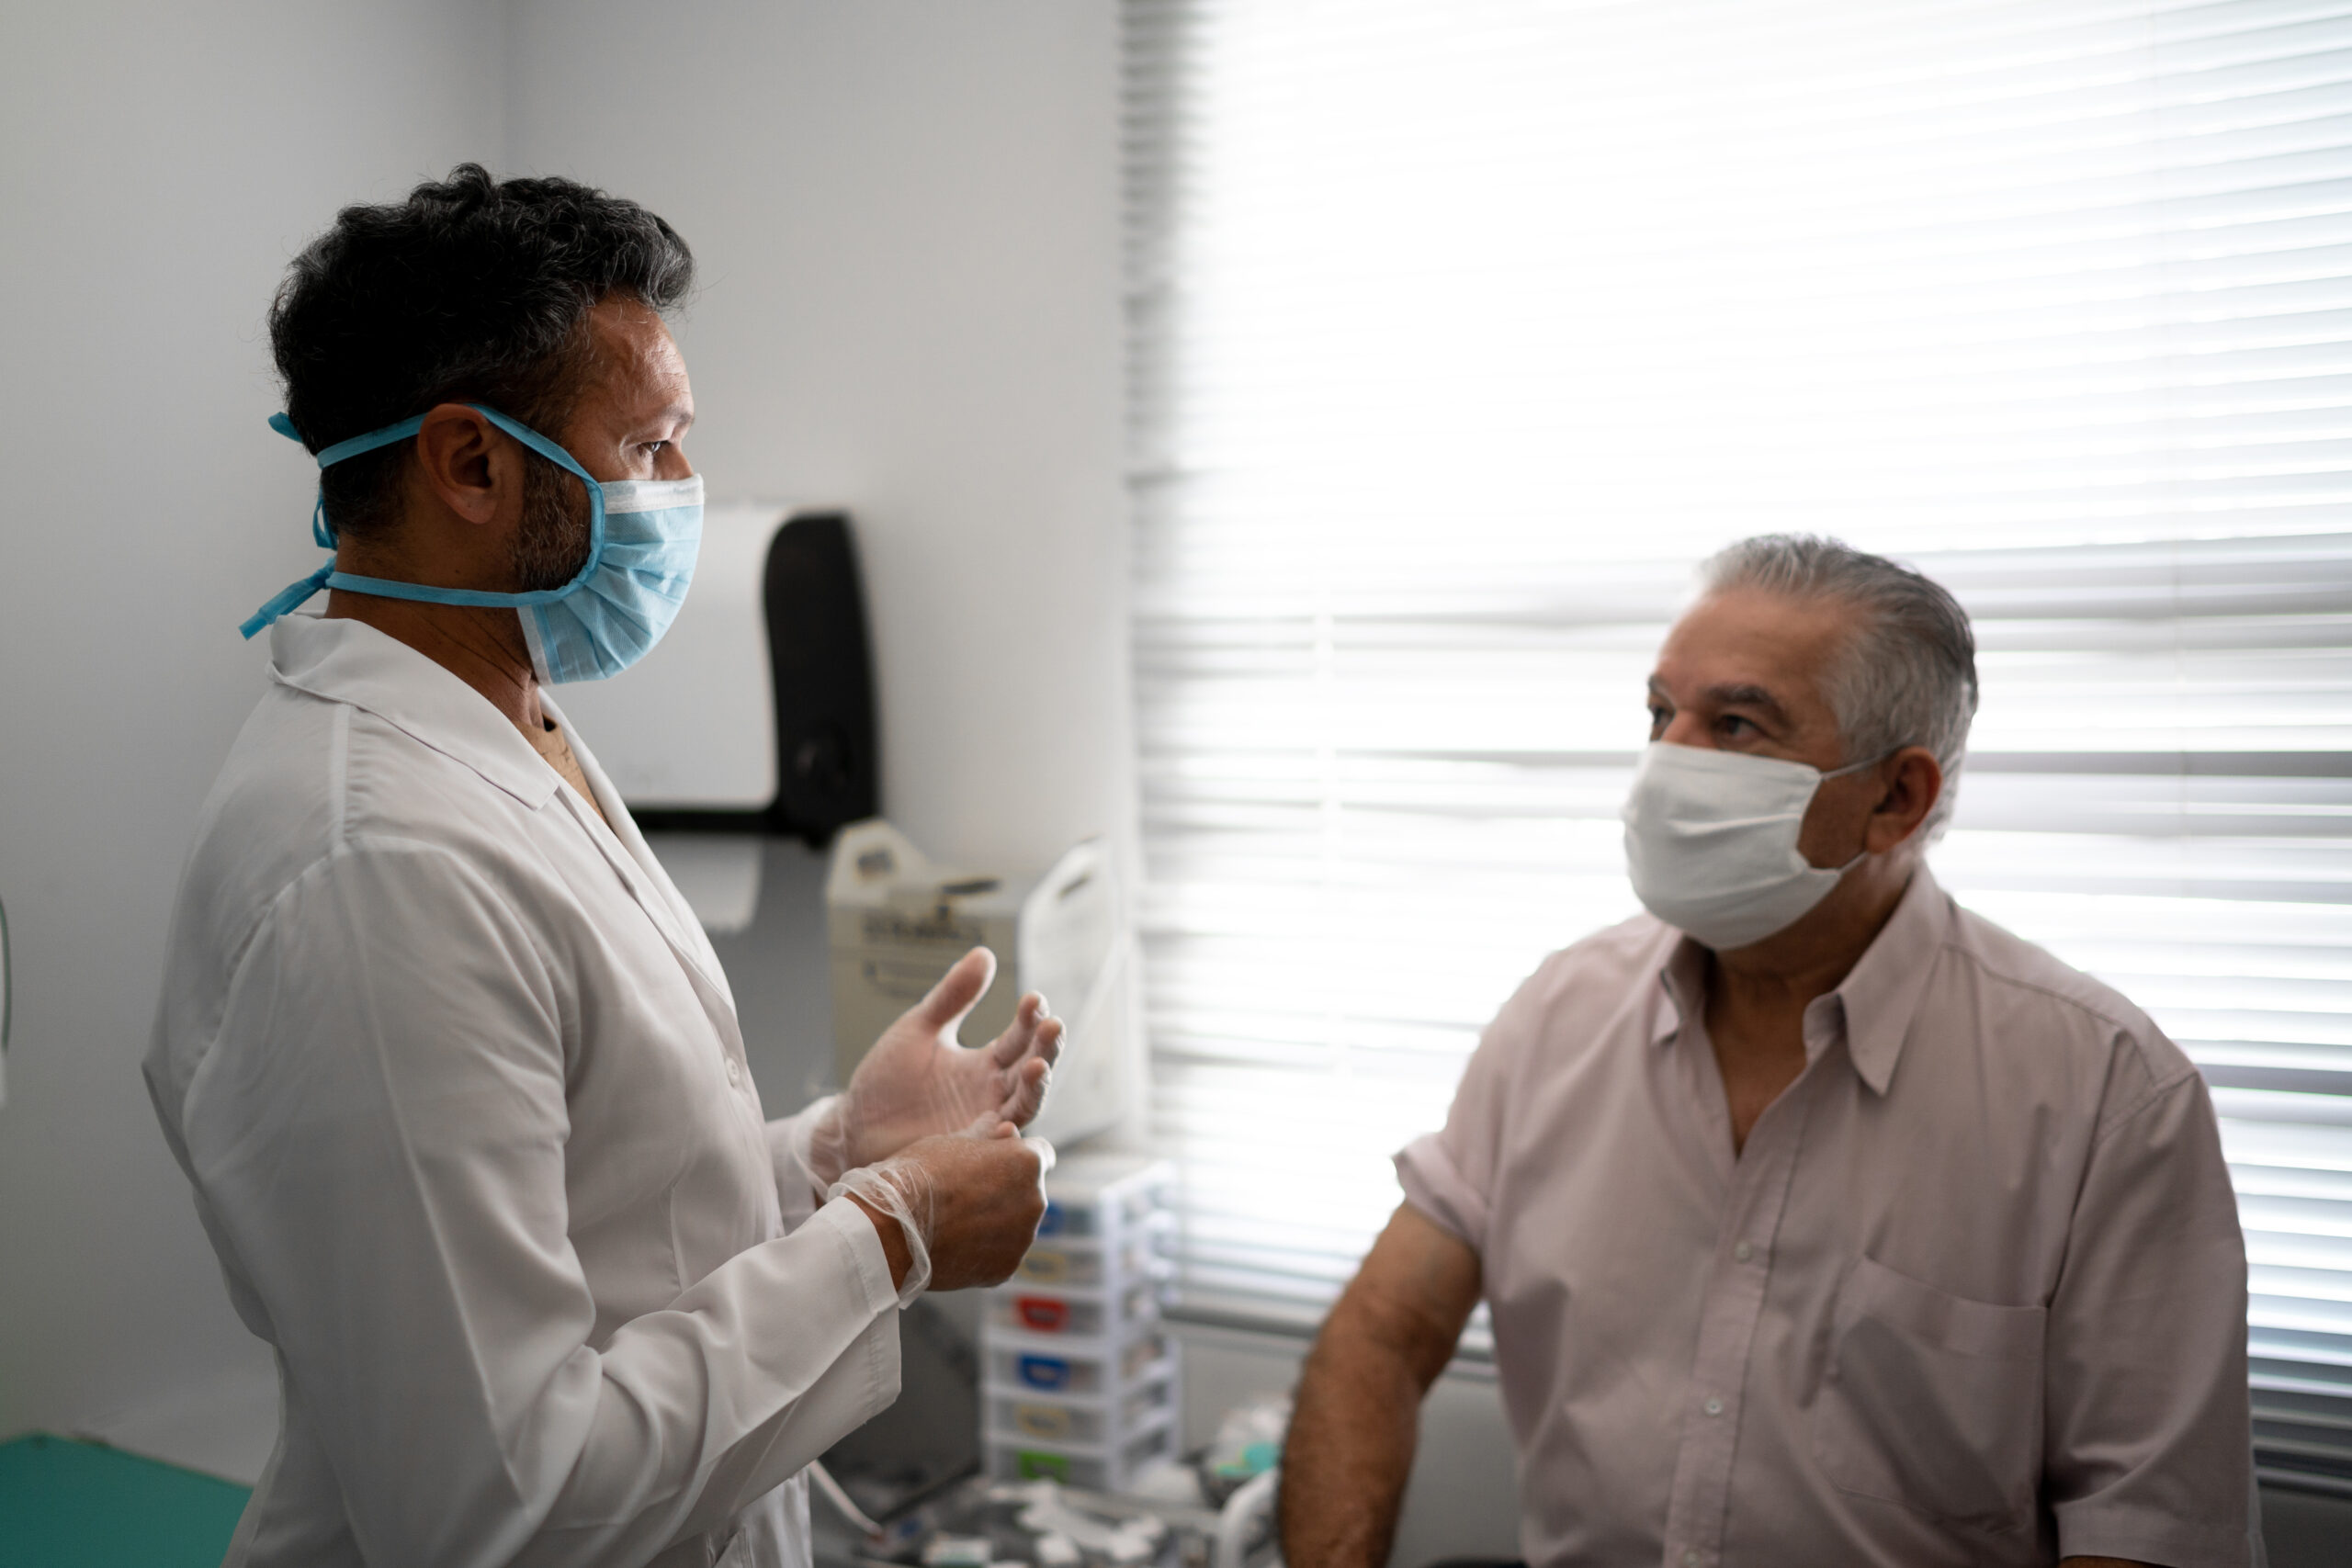 Patient and doctor wearing face masks during appointment.